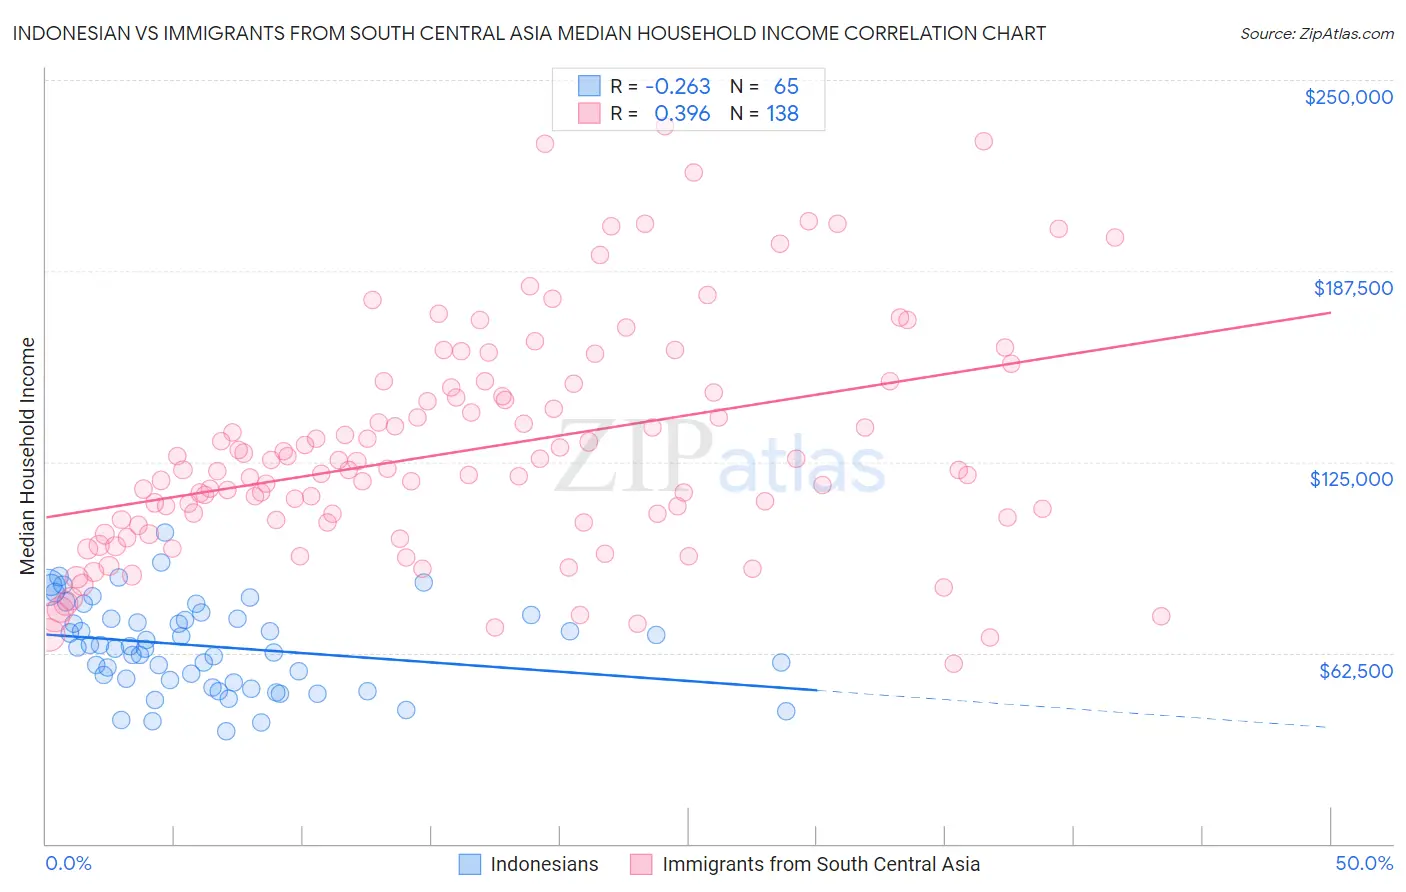 Indonesian vs Immigrants from South Central Asia Median Household Income